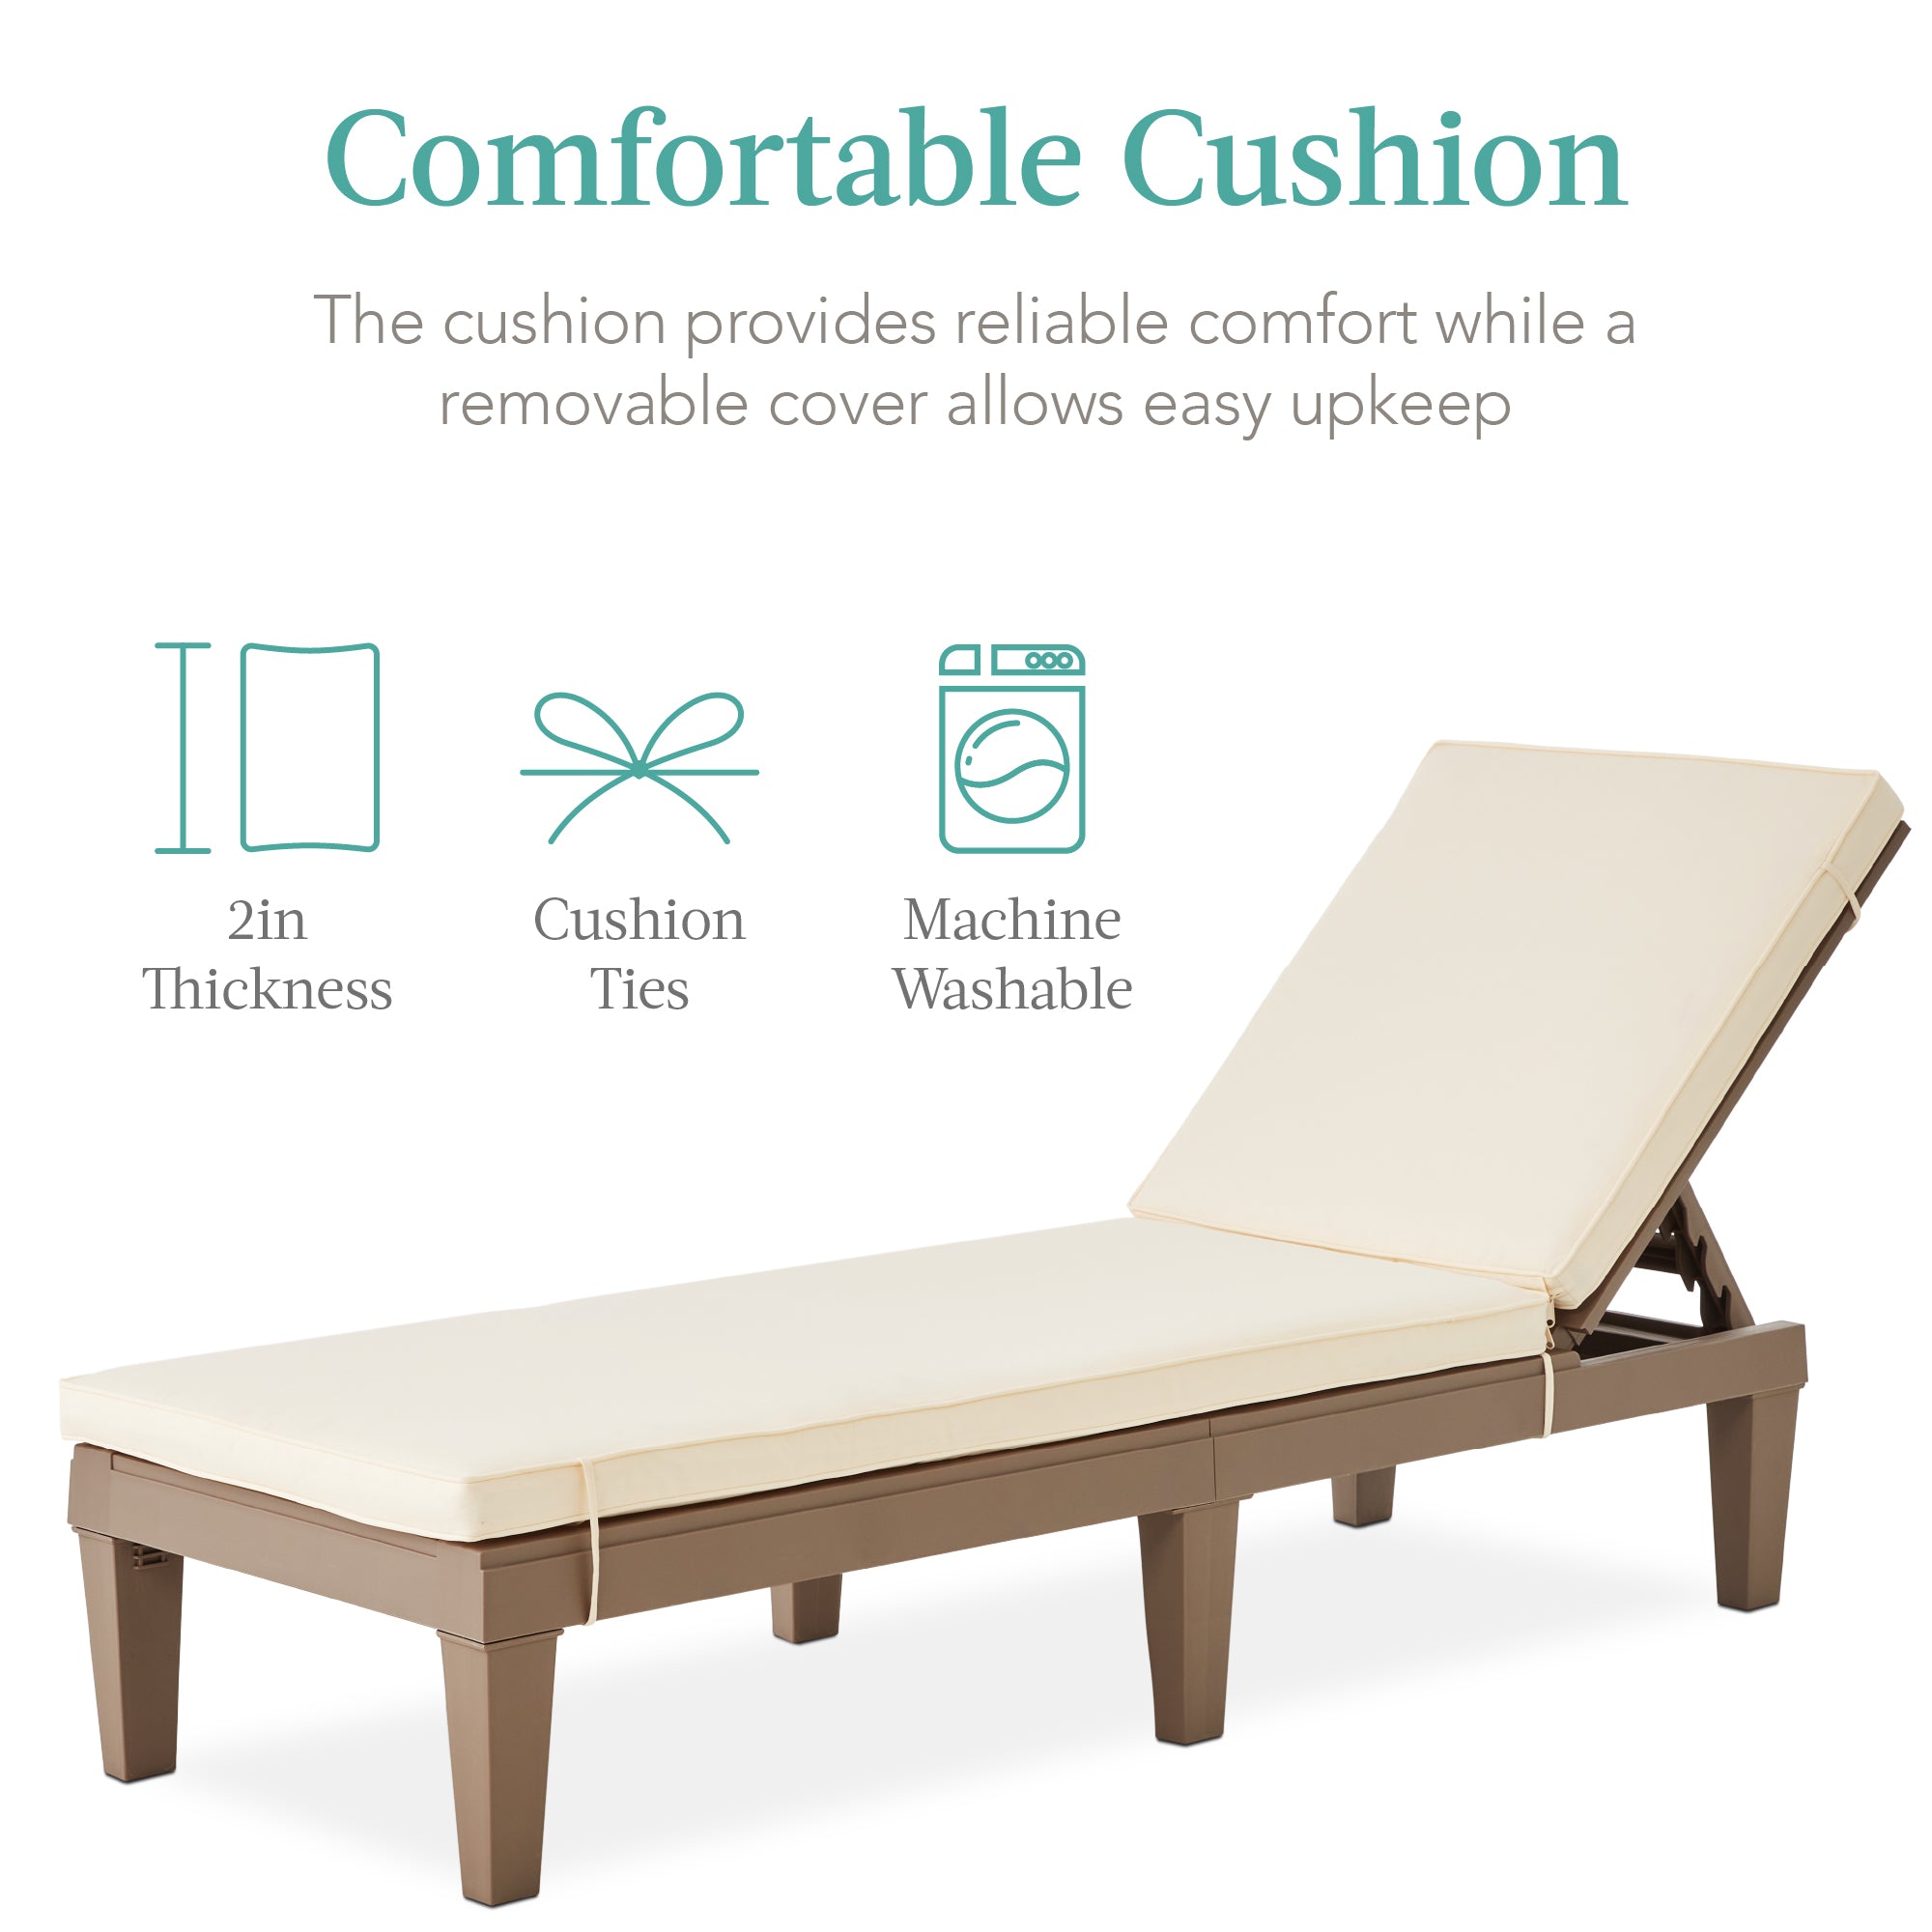 SINGES Lounger Cushion Patio Chaise Lounge Cushion Outdoor Mattress Recliner  Padded Seat Cushion Reclining Chair Rocking with Ties 